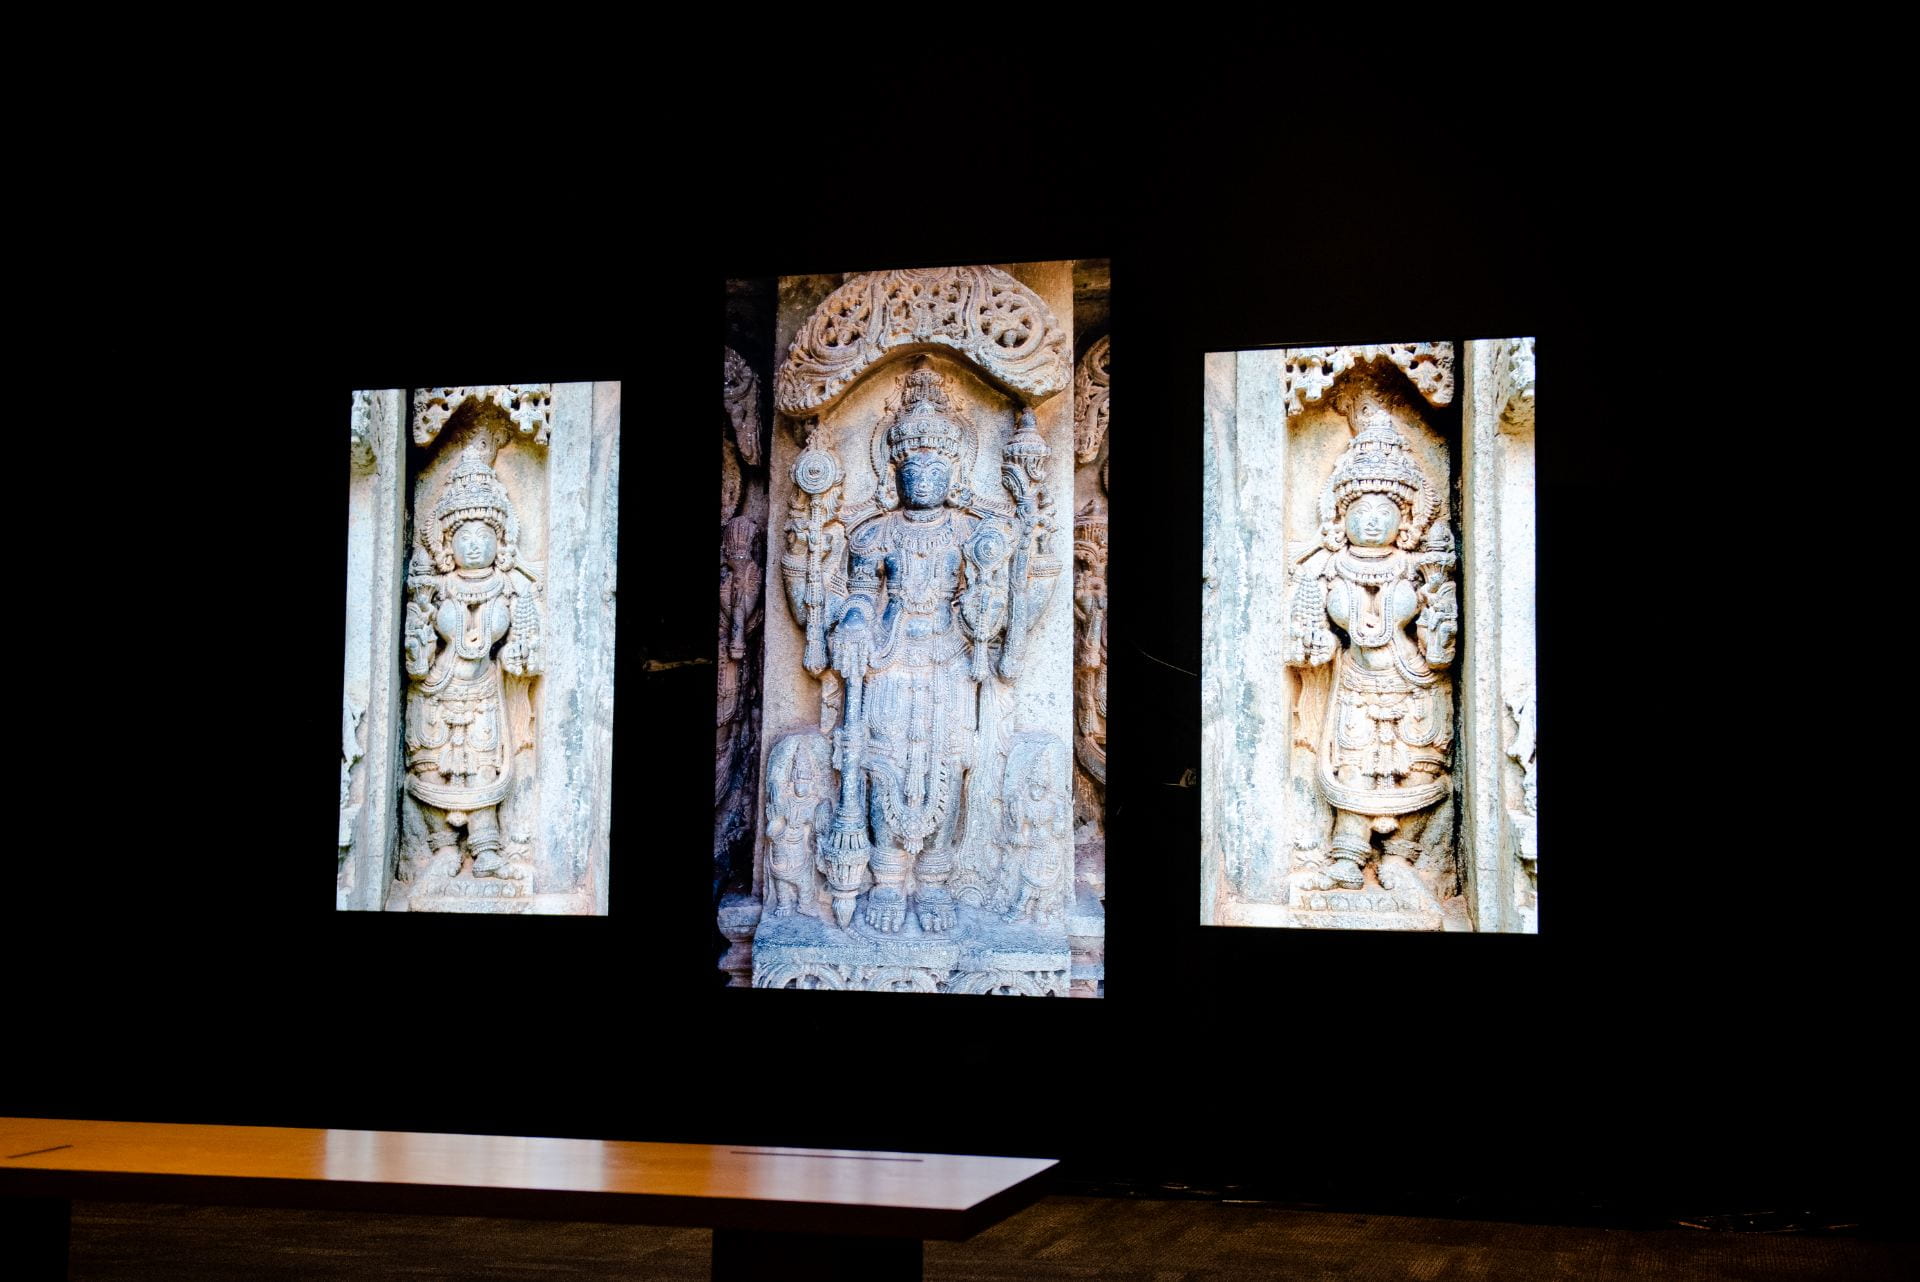 Gallery photo of the exhibition "Transfigurations: Reanimating Ancient Art of India by David Lebrun" at the Beach Museum of Art.